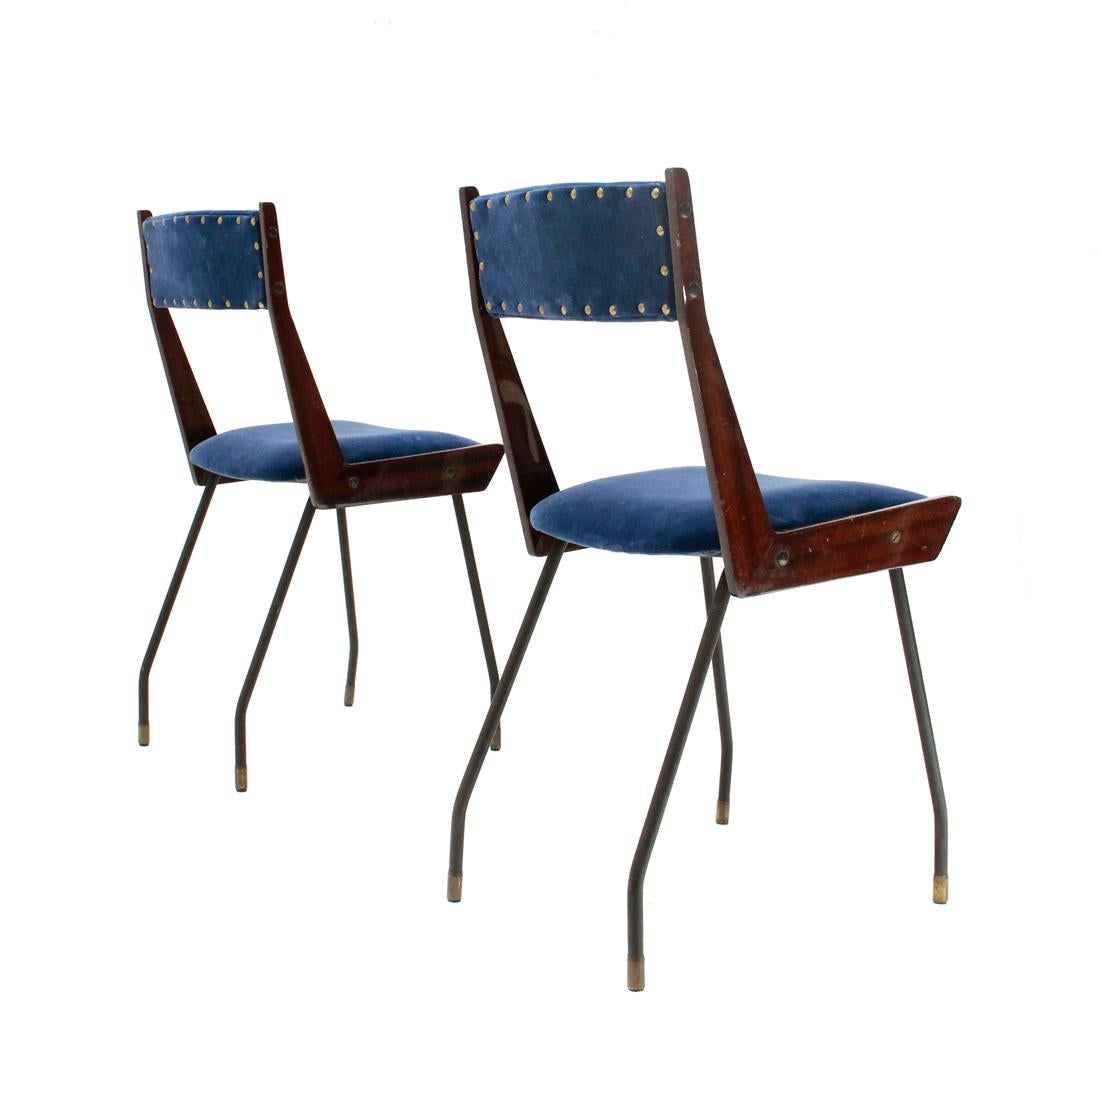 Pair of Midcentury Italian Blue Velvet Dining Chair by RB Rossana, 1950s In Good Condition For Sale In Savona, IT